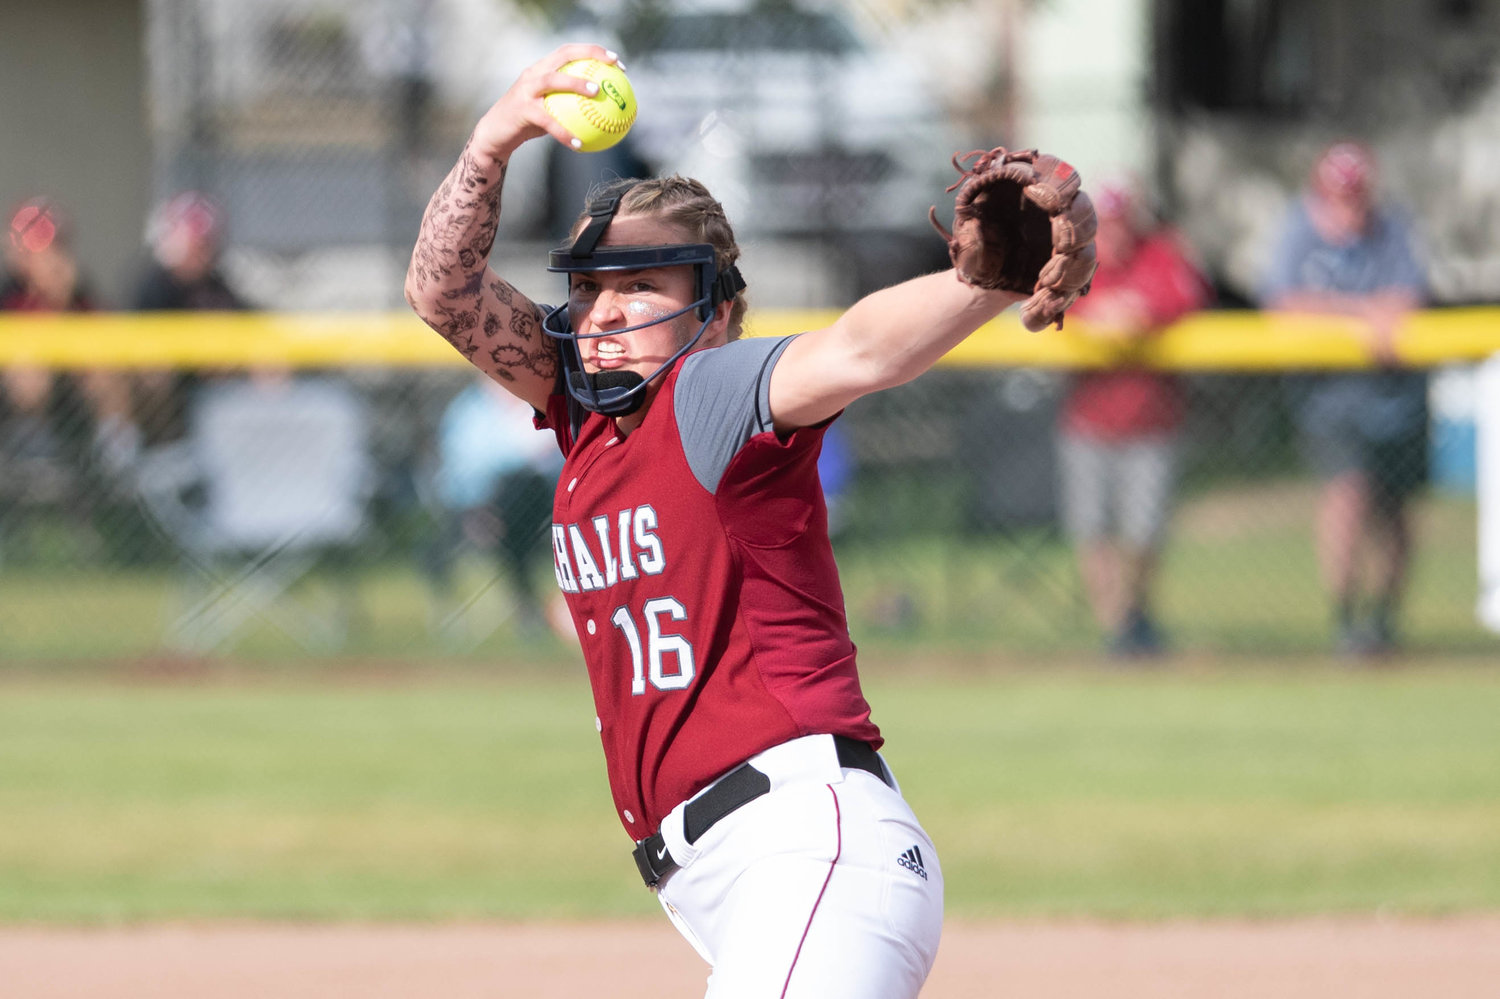 W.F. West's Kamy Dacus winds up to deliver a pitch against Olympic in the 2A State Quarterfinals at Carlon Park in Selah May 27.